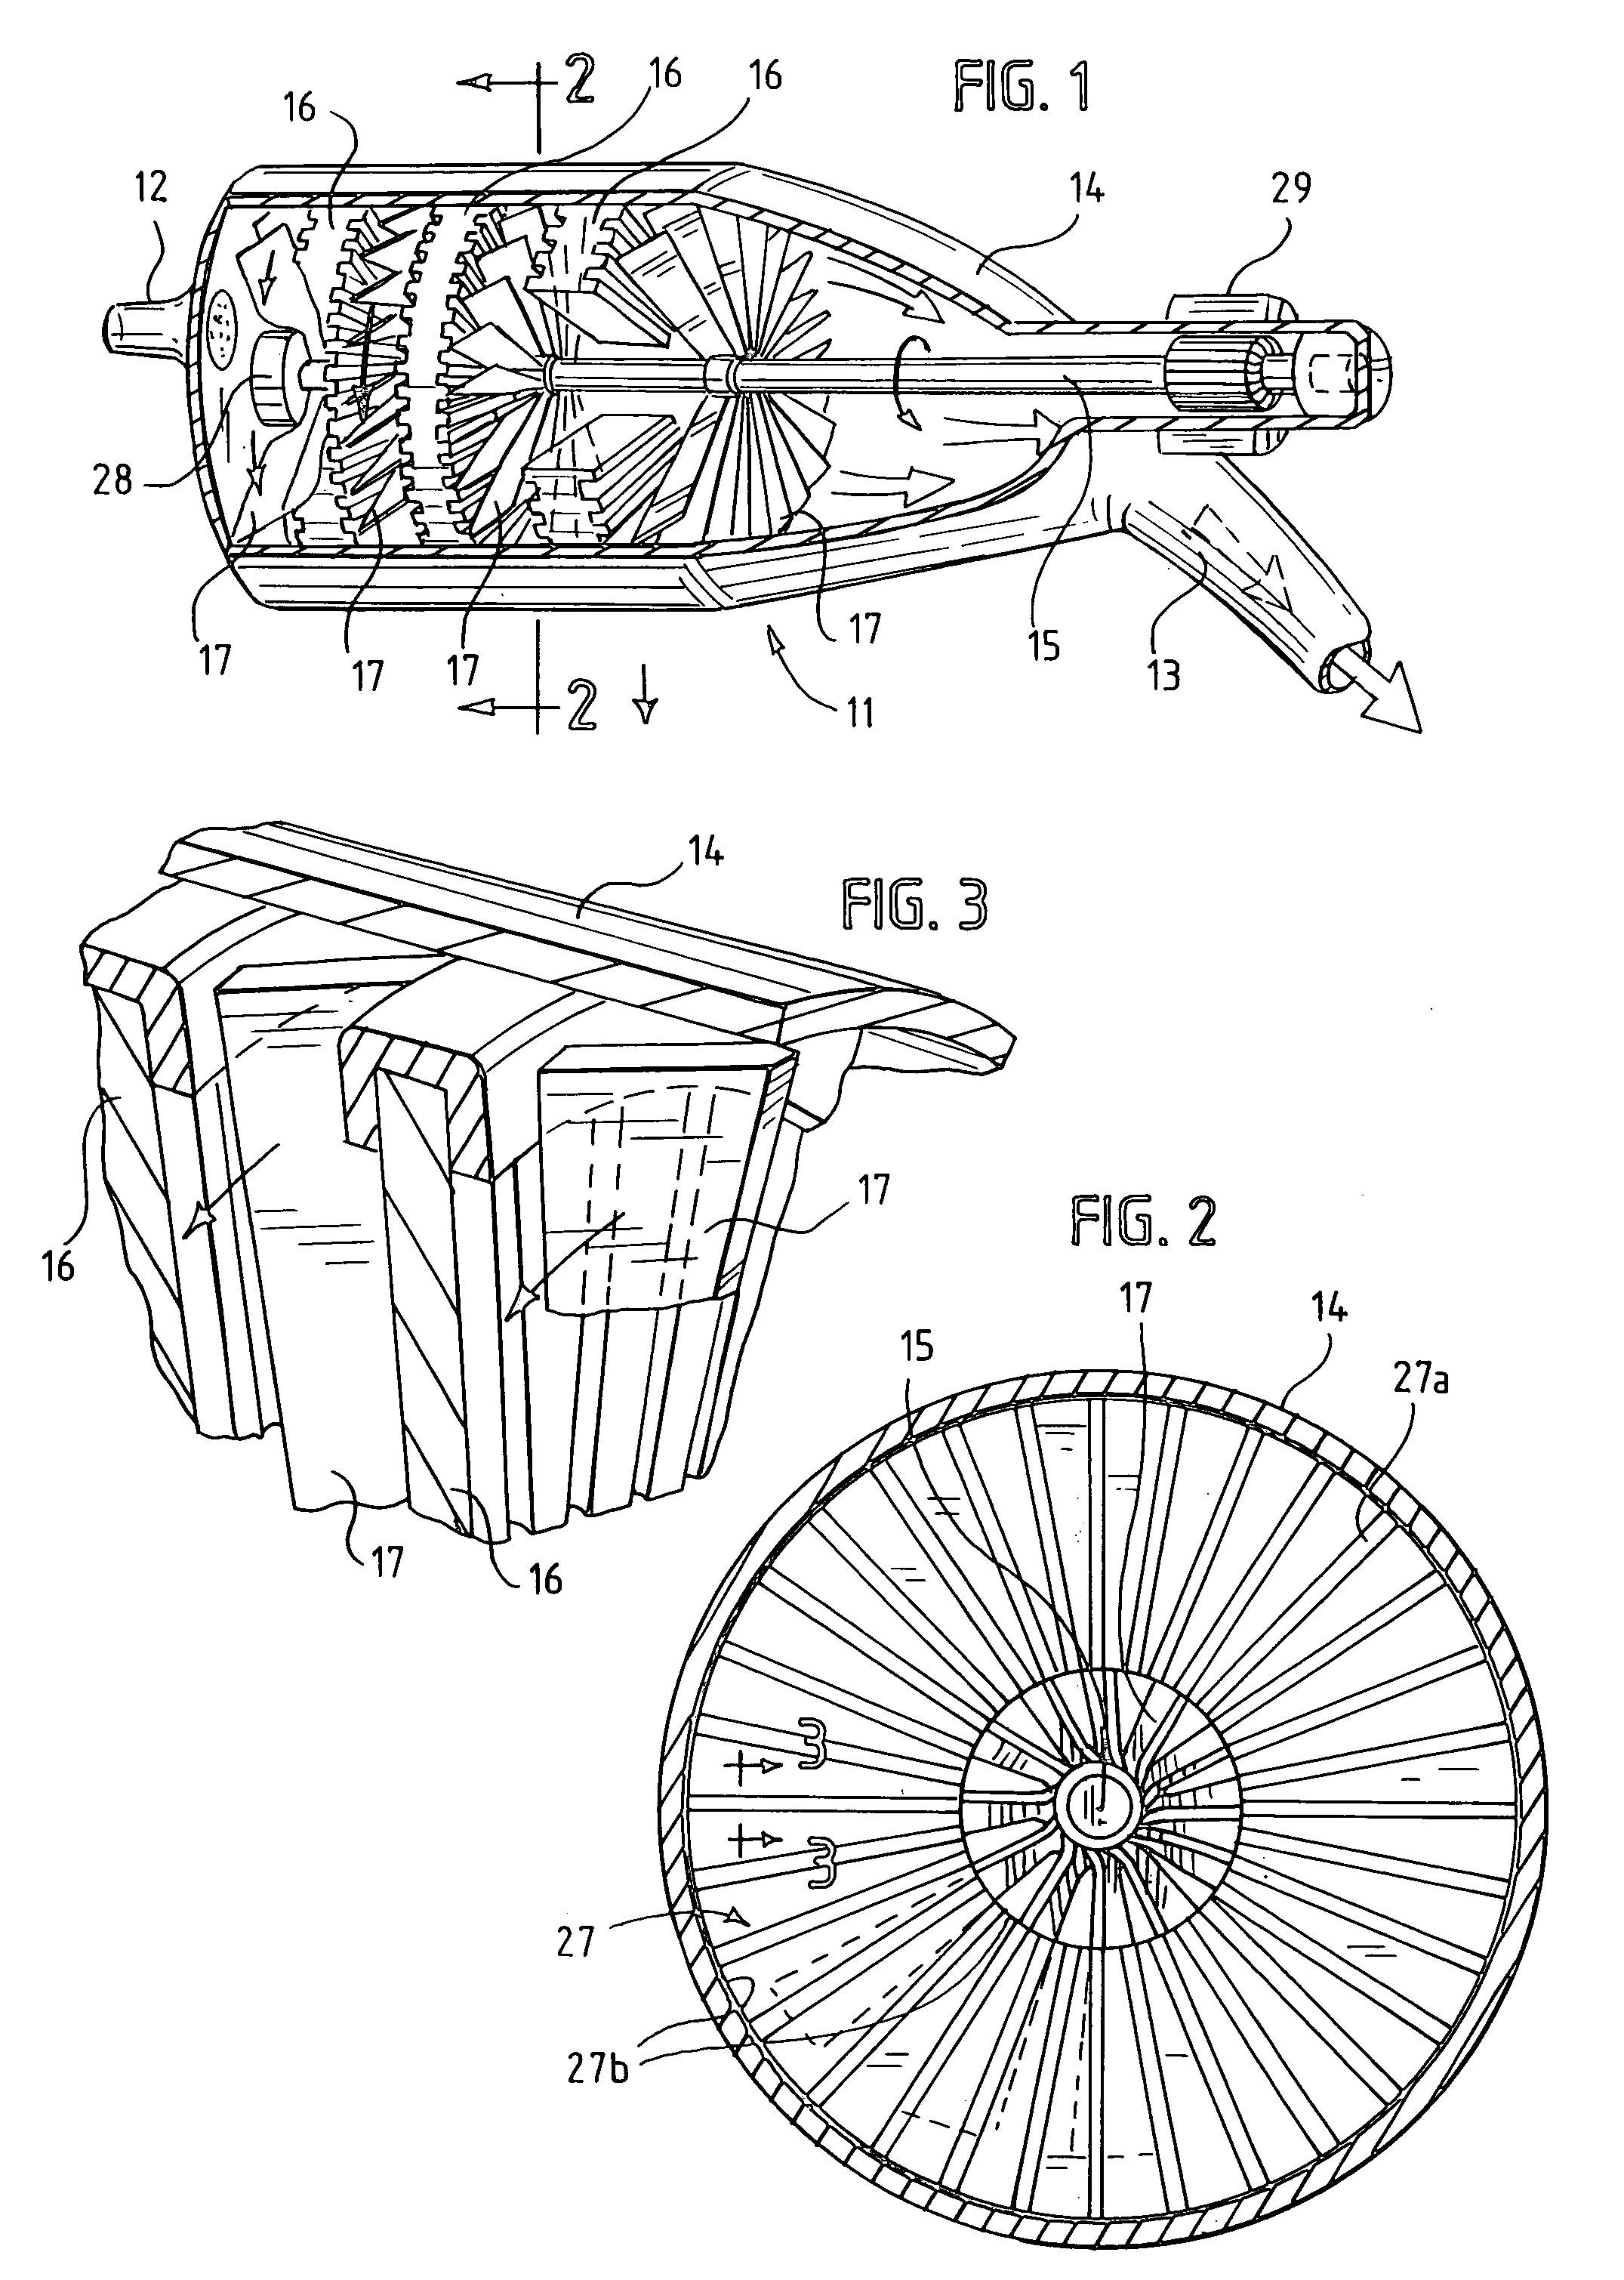 Ultra-high speed vacuum pump system with first stage turbofan and second stage turbomolecular pump